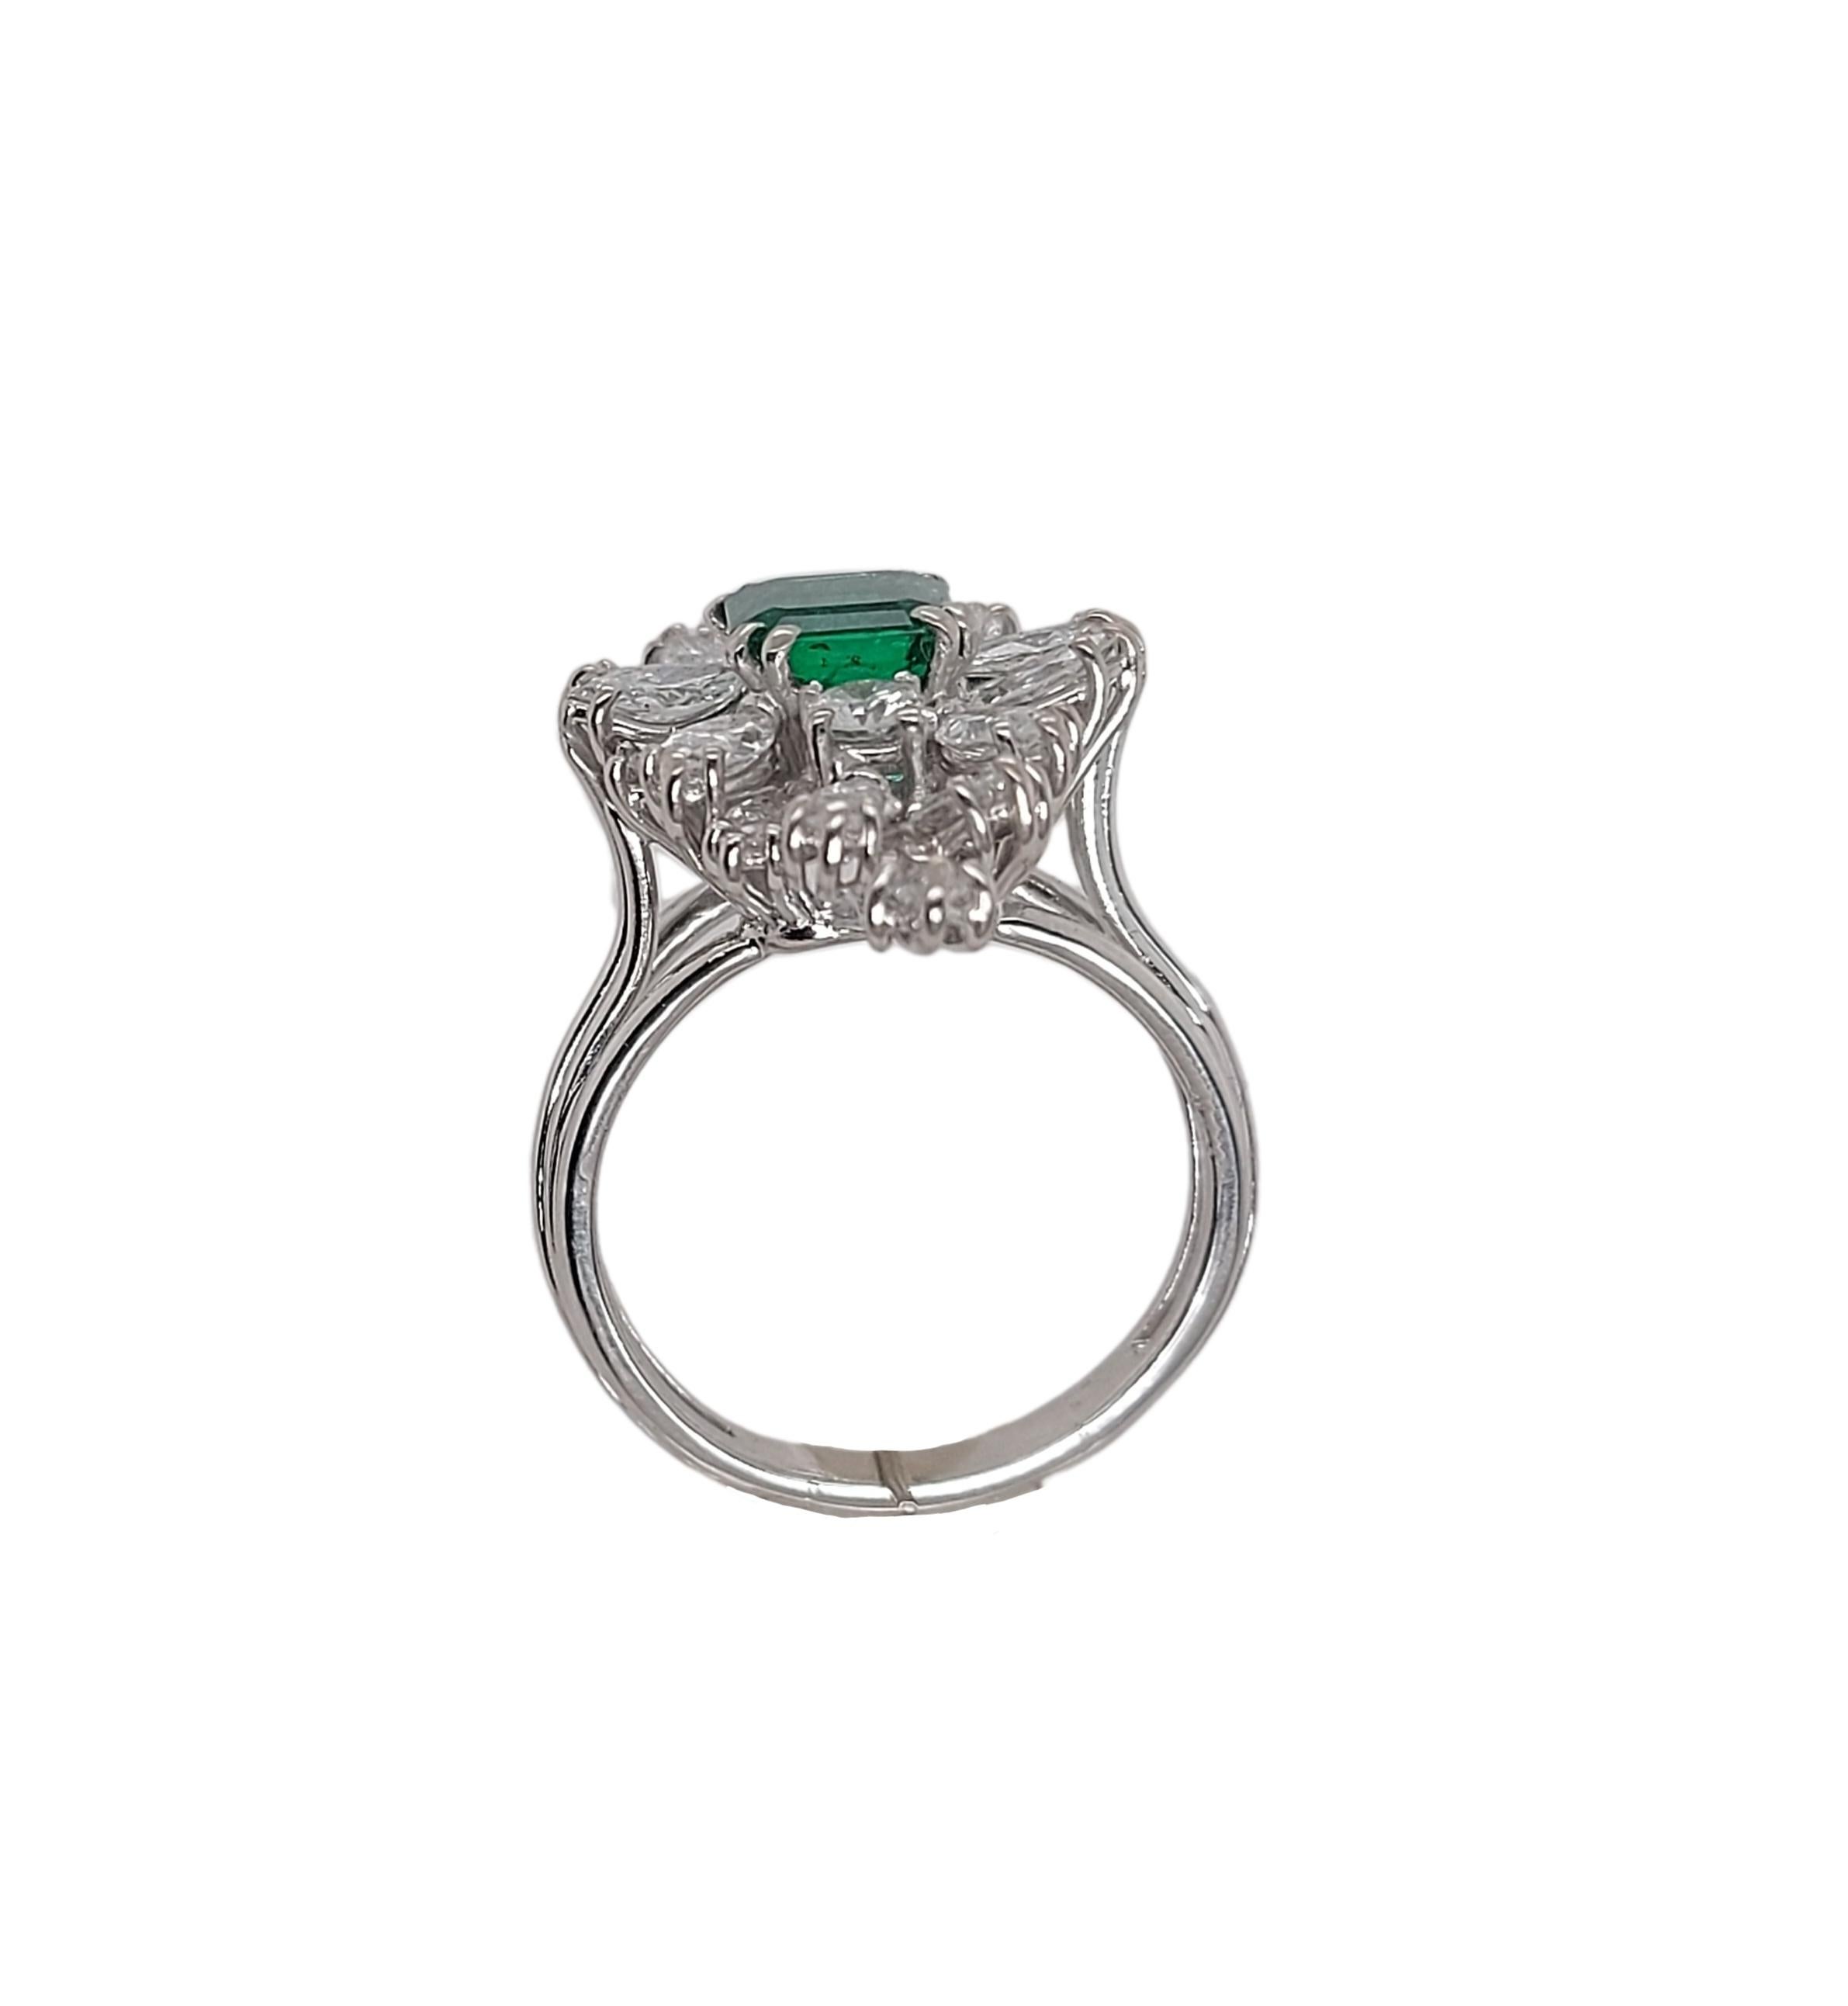 18kt White Gold Ring with 1.49 Ct Emerald Stone Surrounded by Diamonds For Sale 4